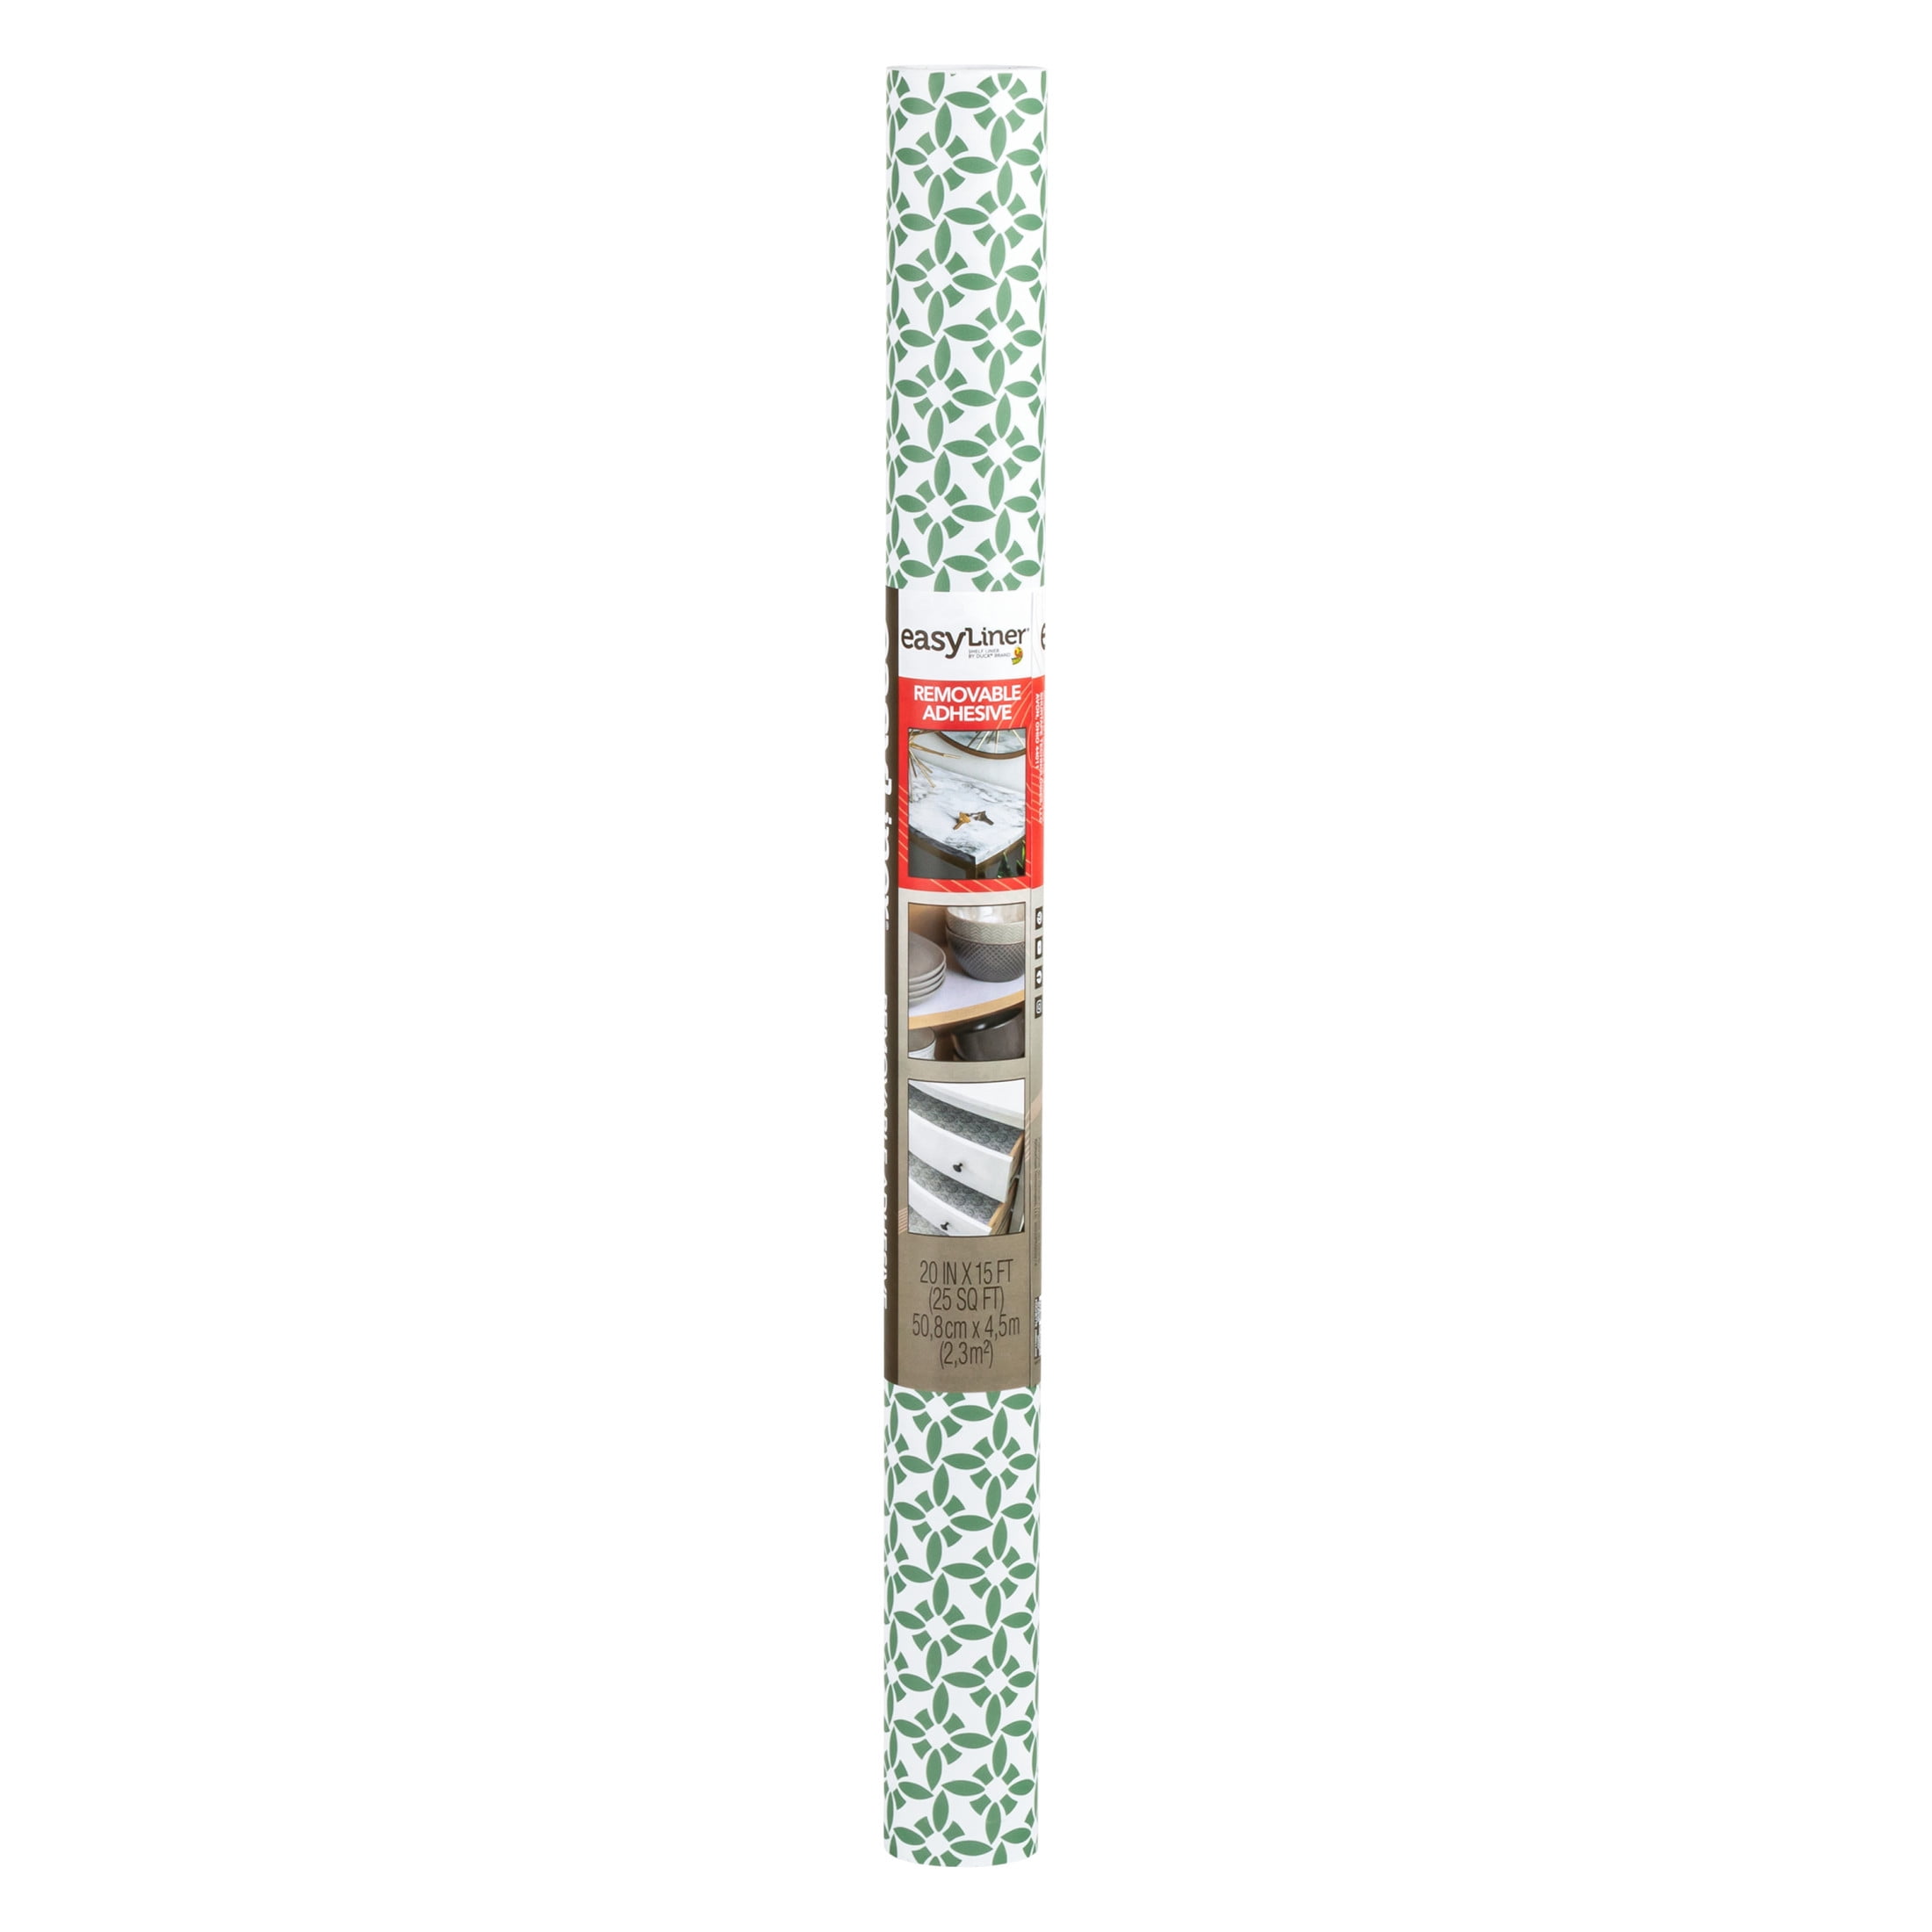 EasyLiner Brand Contact Paper Adhesive Shelf Liner, Terrazzo, 20 in. x 15  ft. Roll 